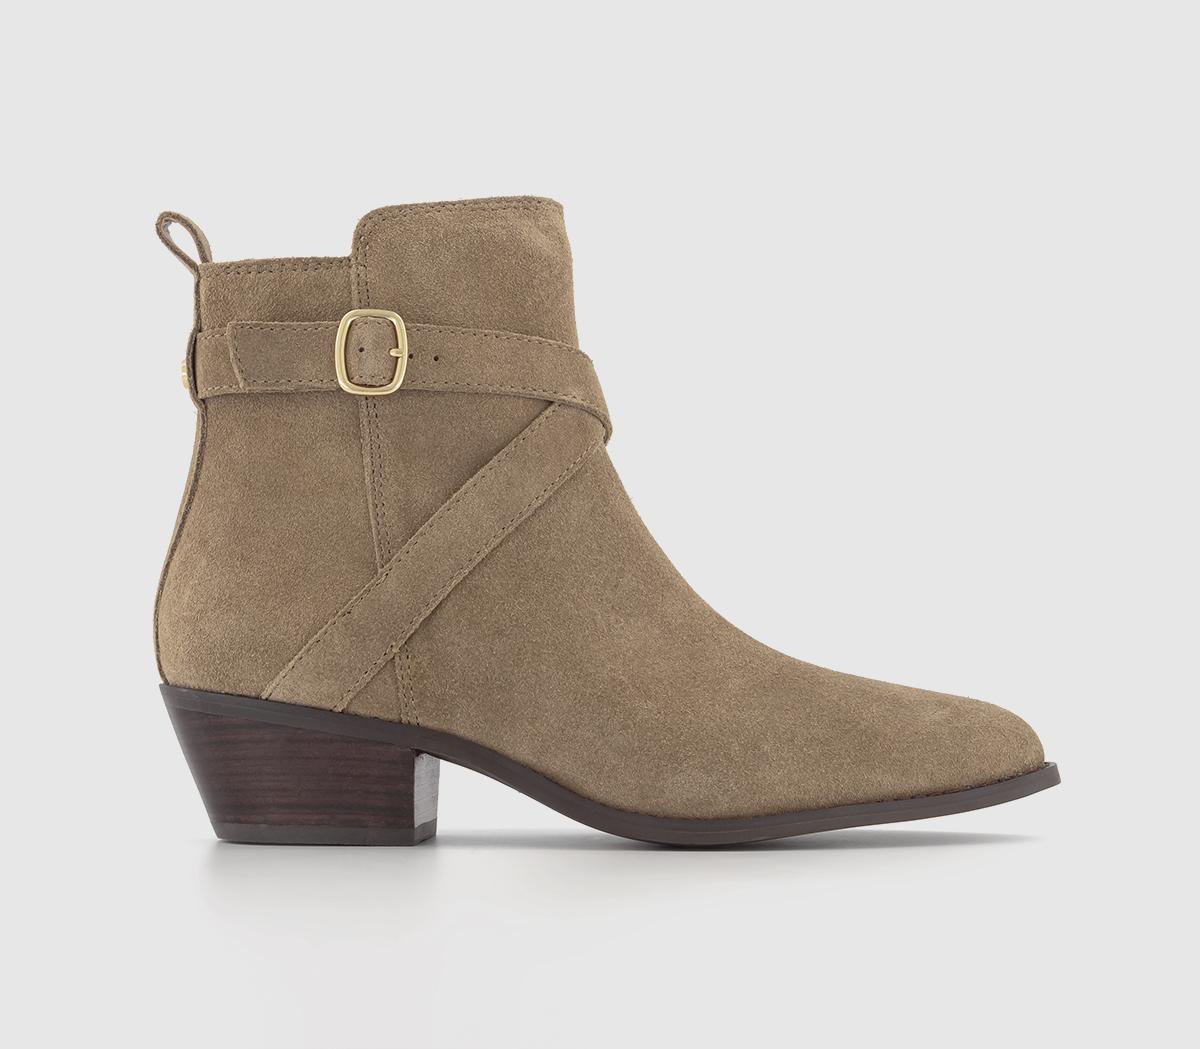 Arcade Strap Detail Pointed Toe Ankle Boots Taupe Suede